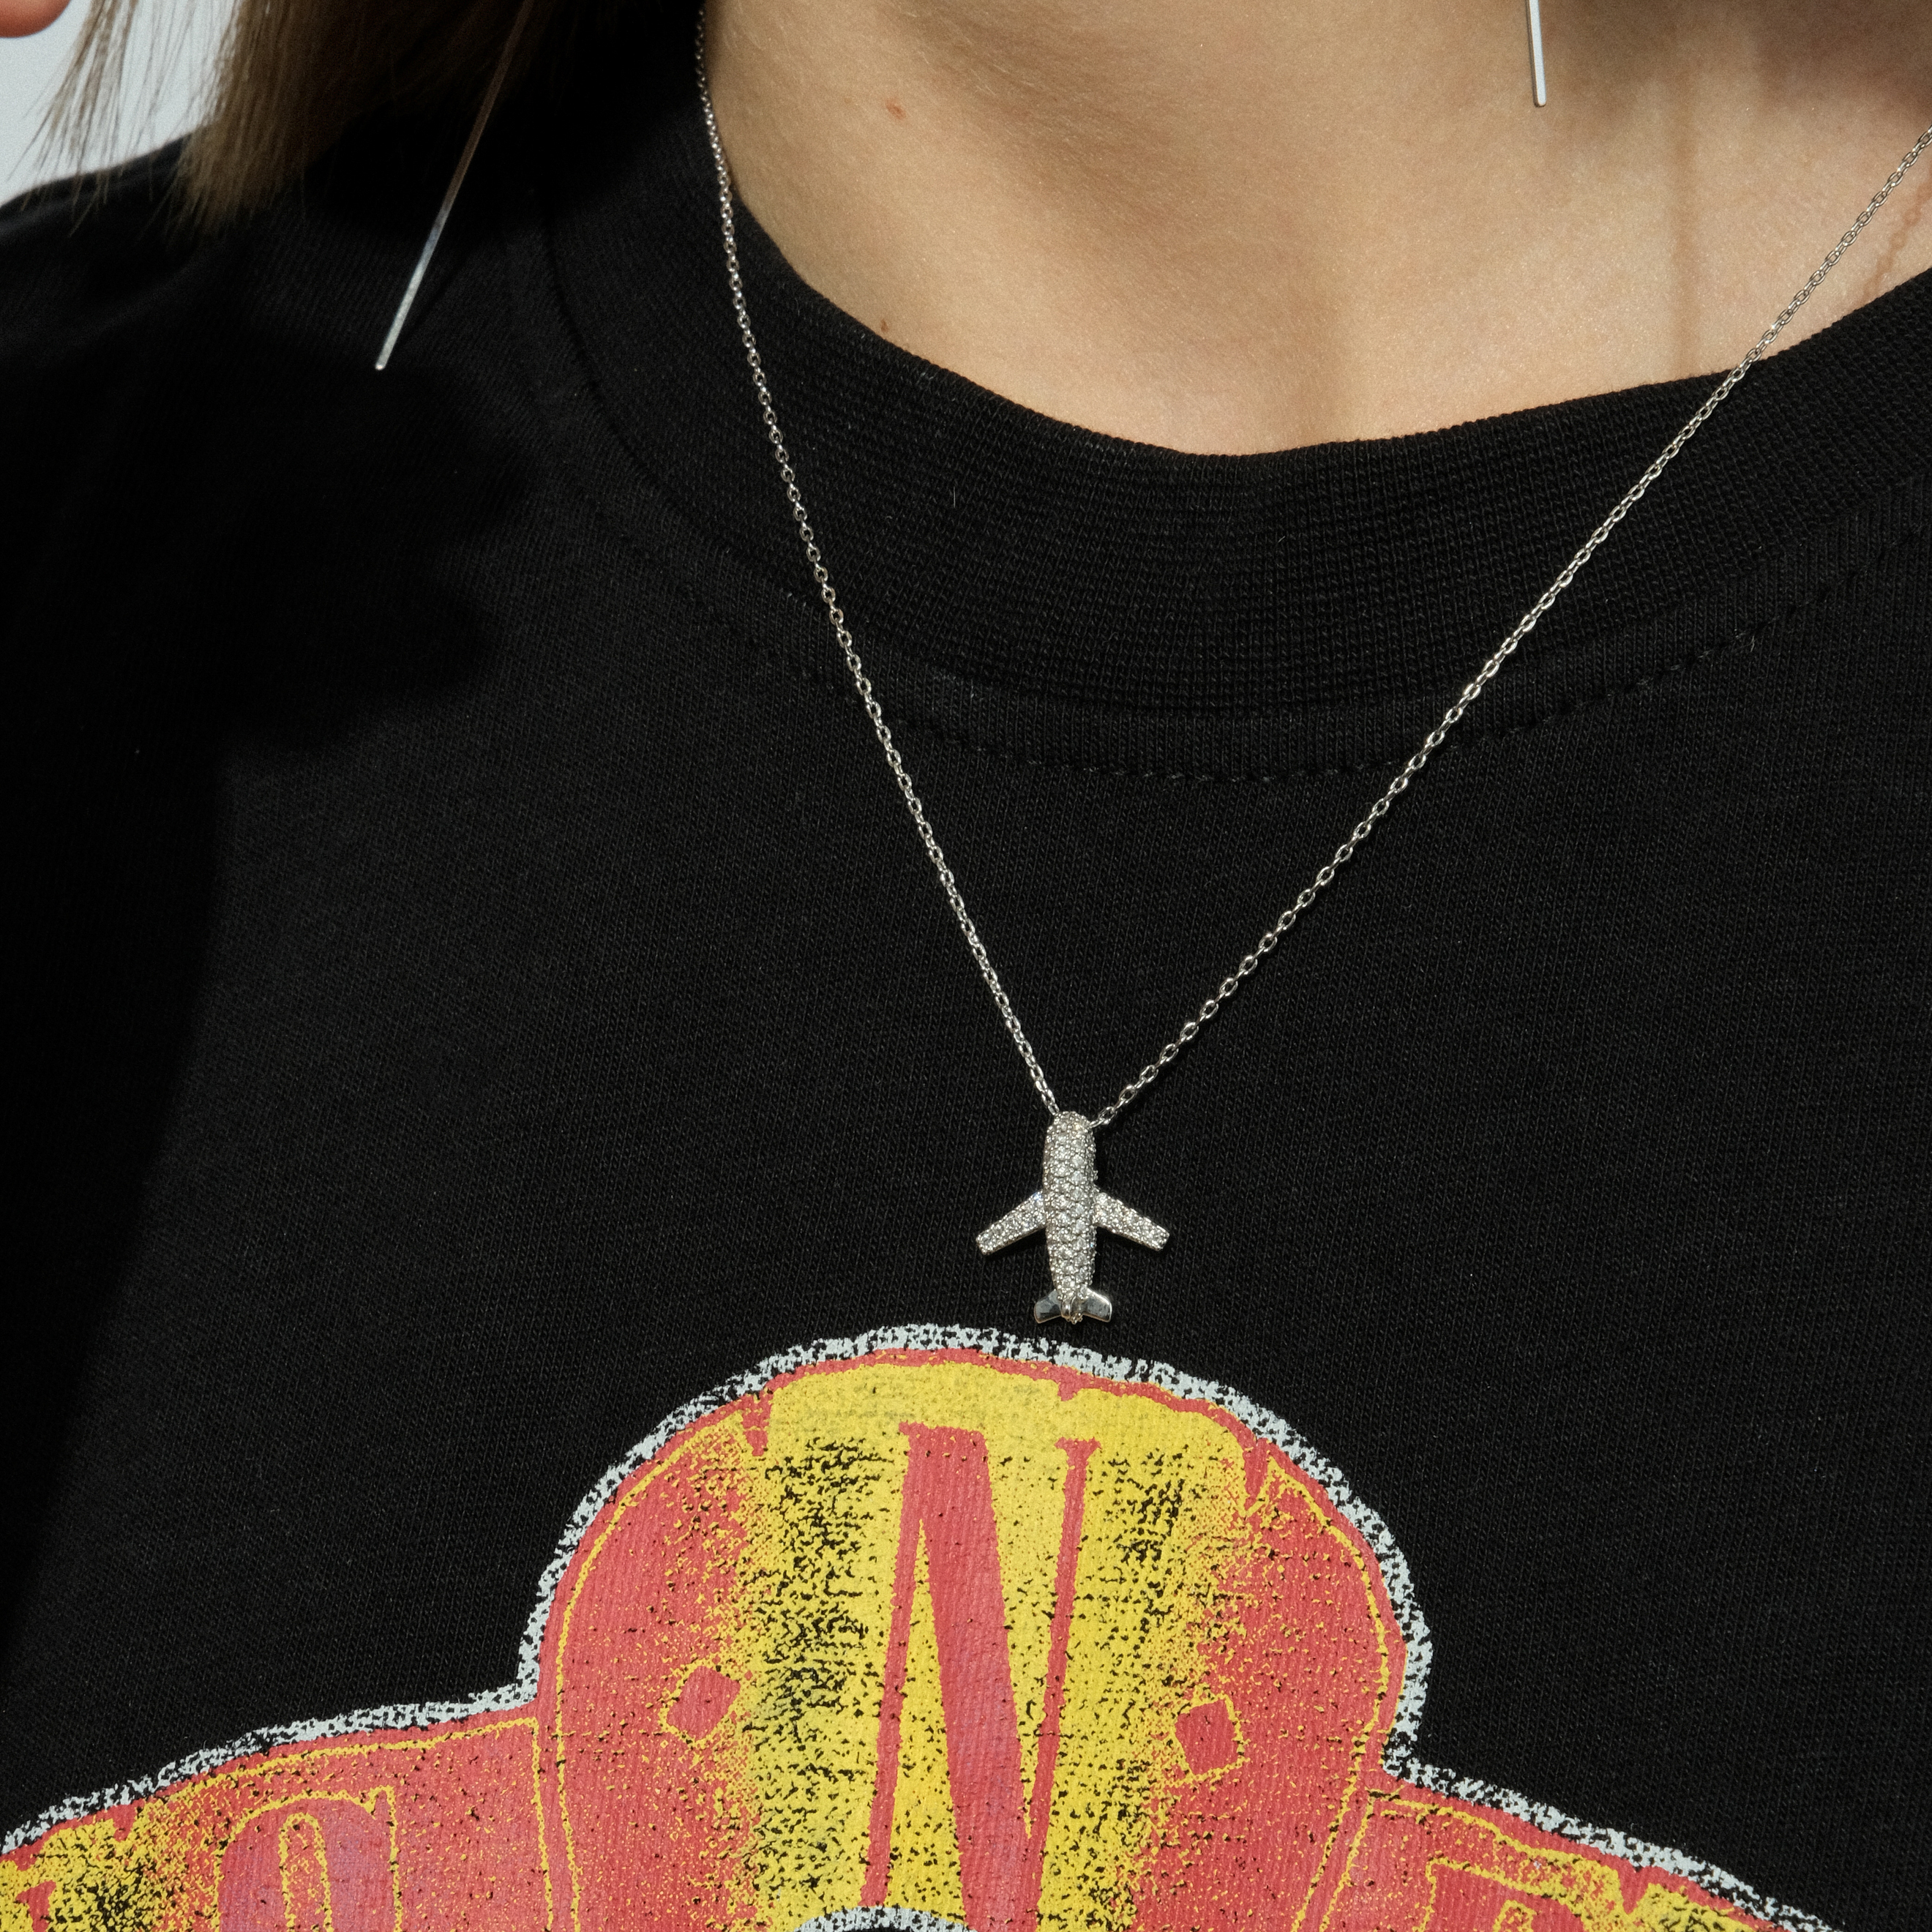 necklace with an airplane pendant – buy at Poison Drop online